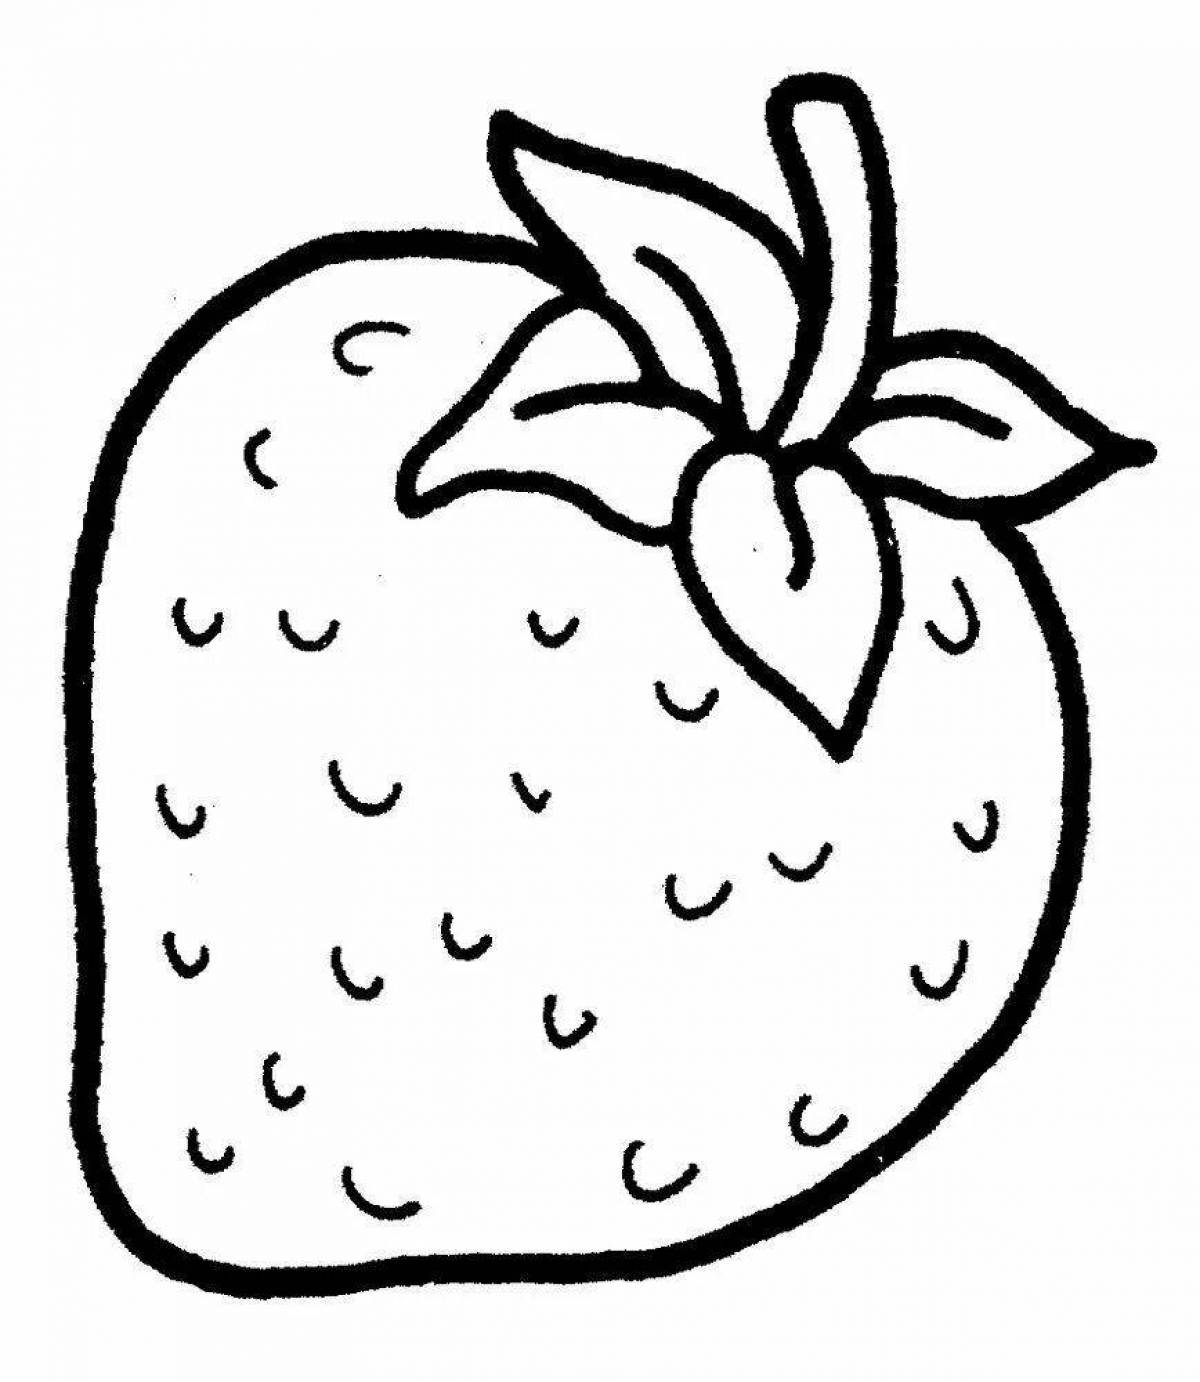 Exquisite strawberry coloring book for girls